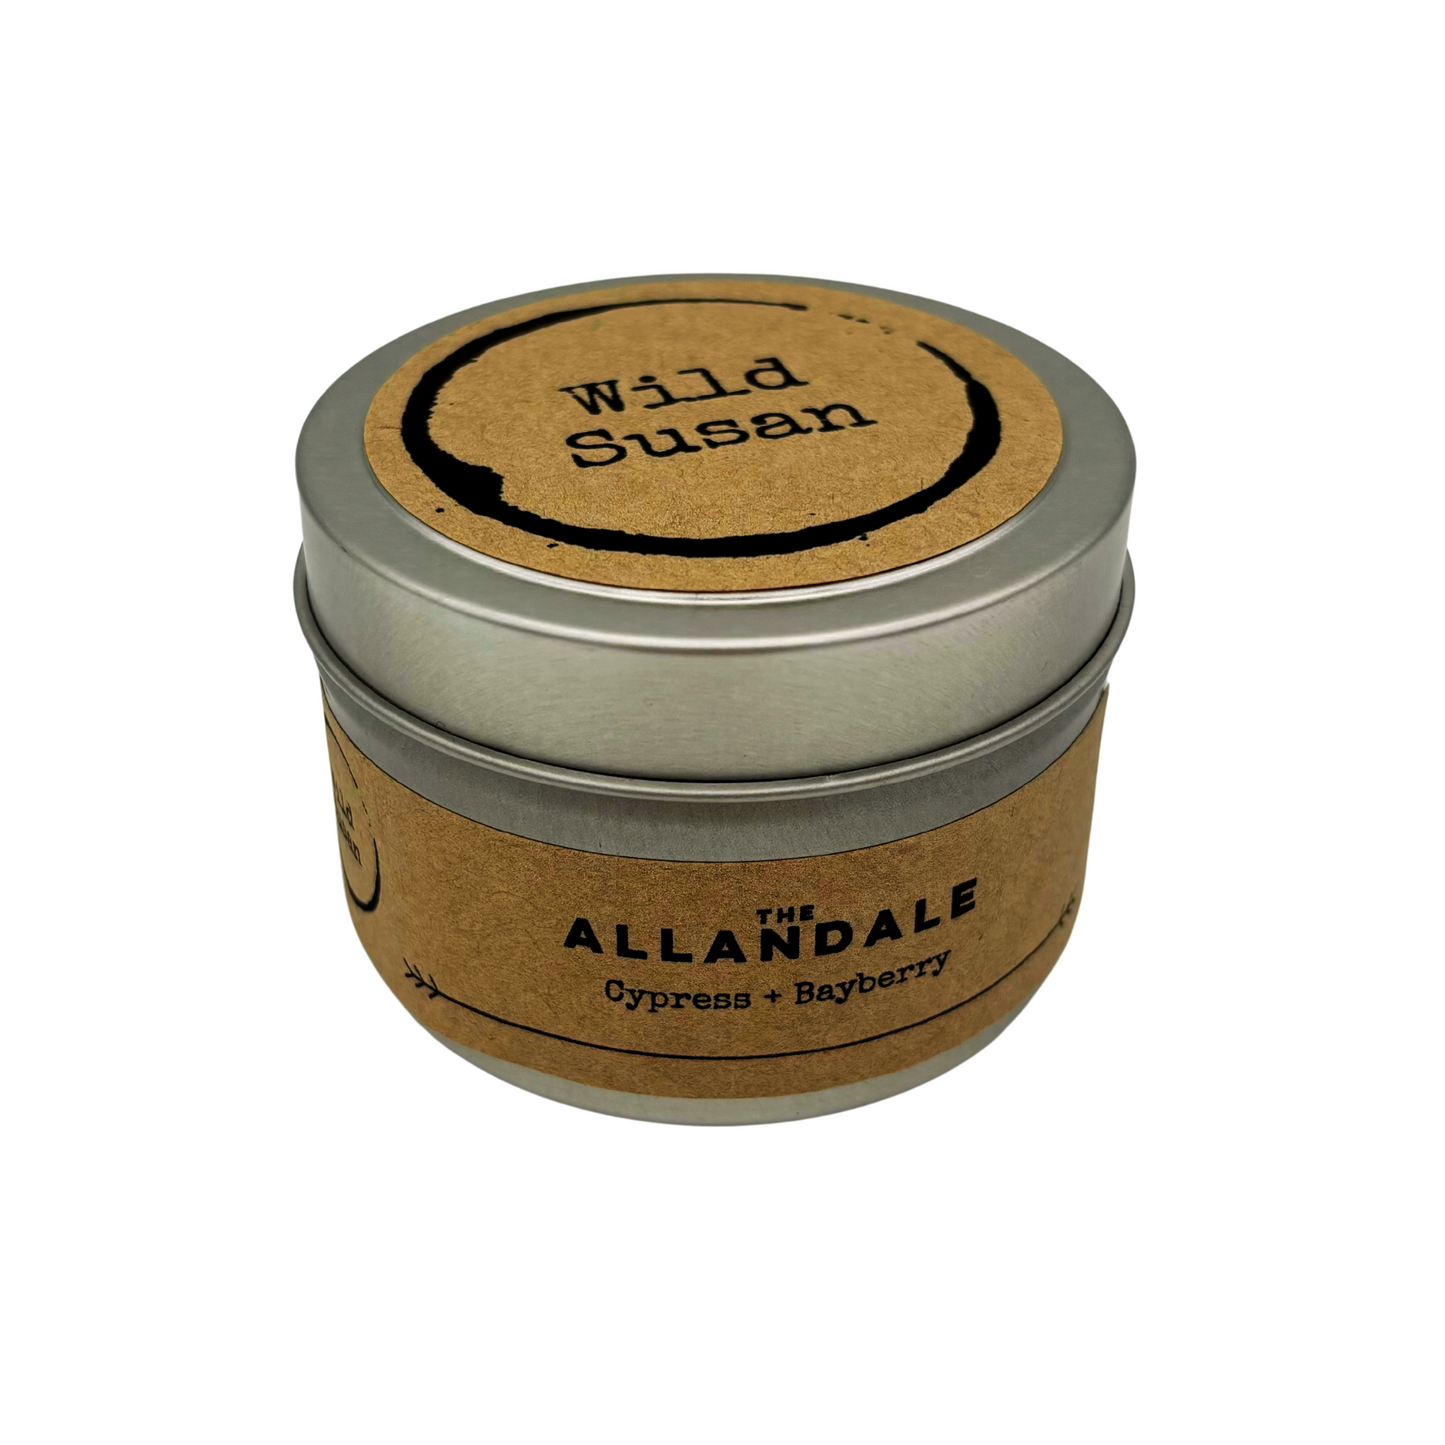 Allandale [Cypress + Bayberry] Soy Candle/Wax Melt